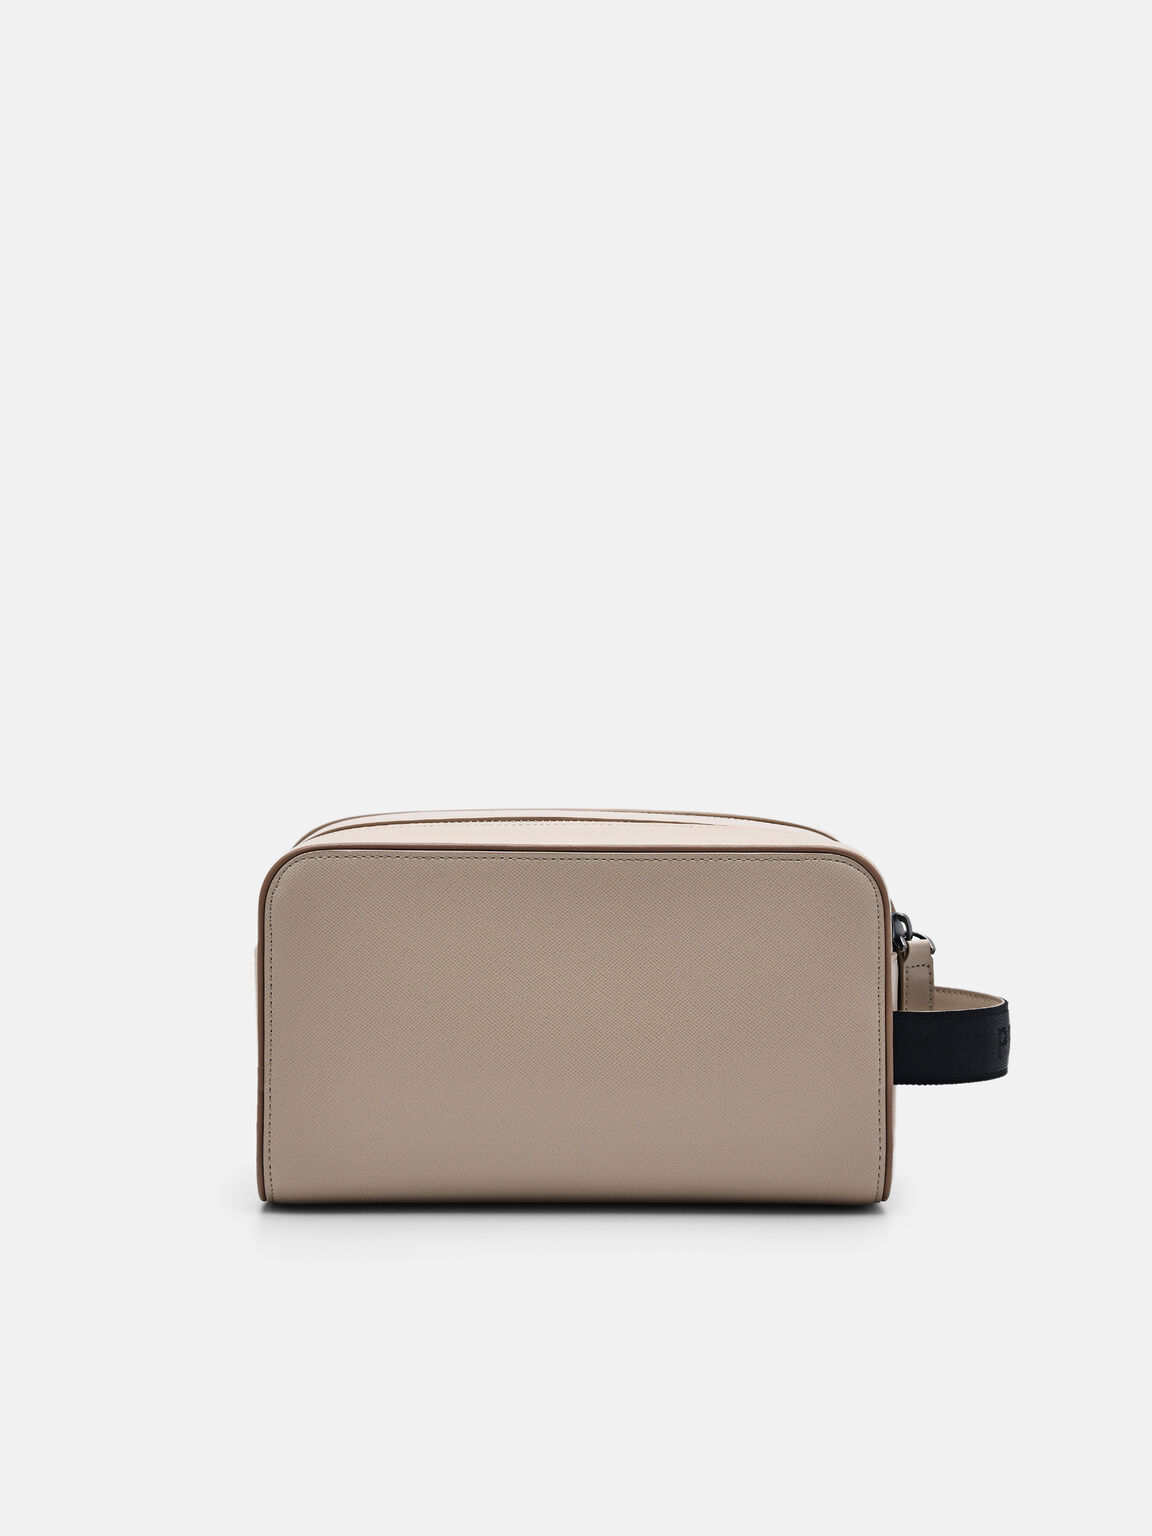 Leather Toiletries Pouch, Taupe, hi-res